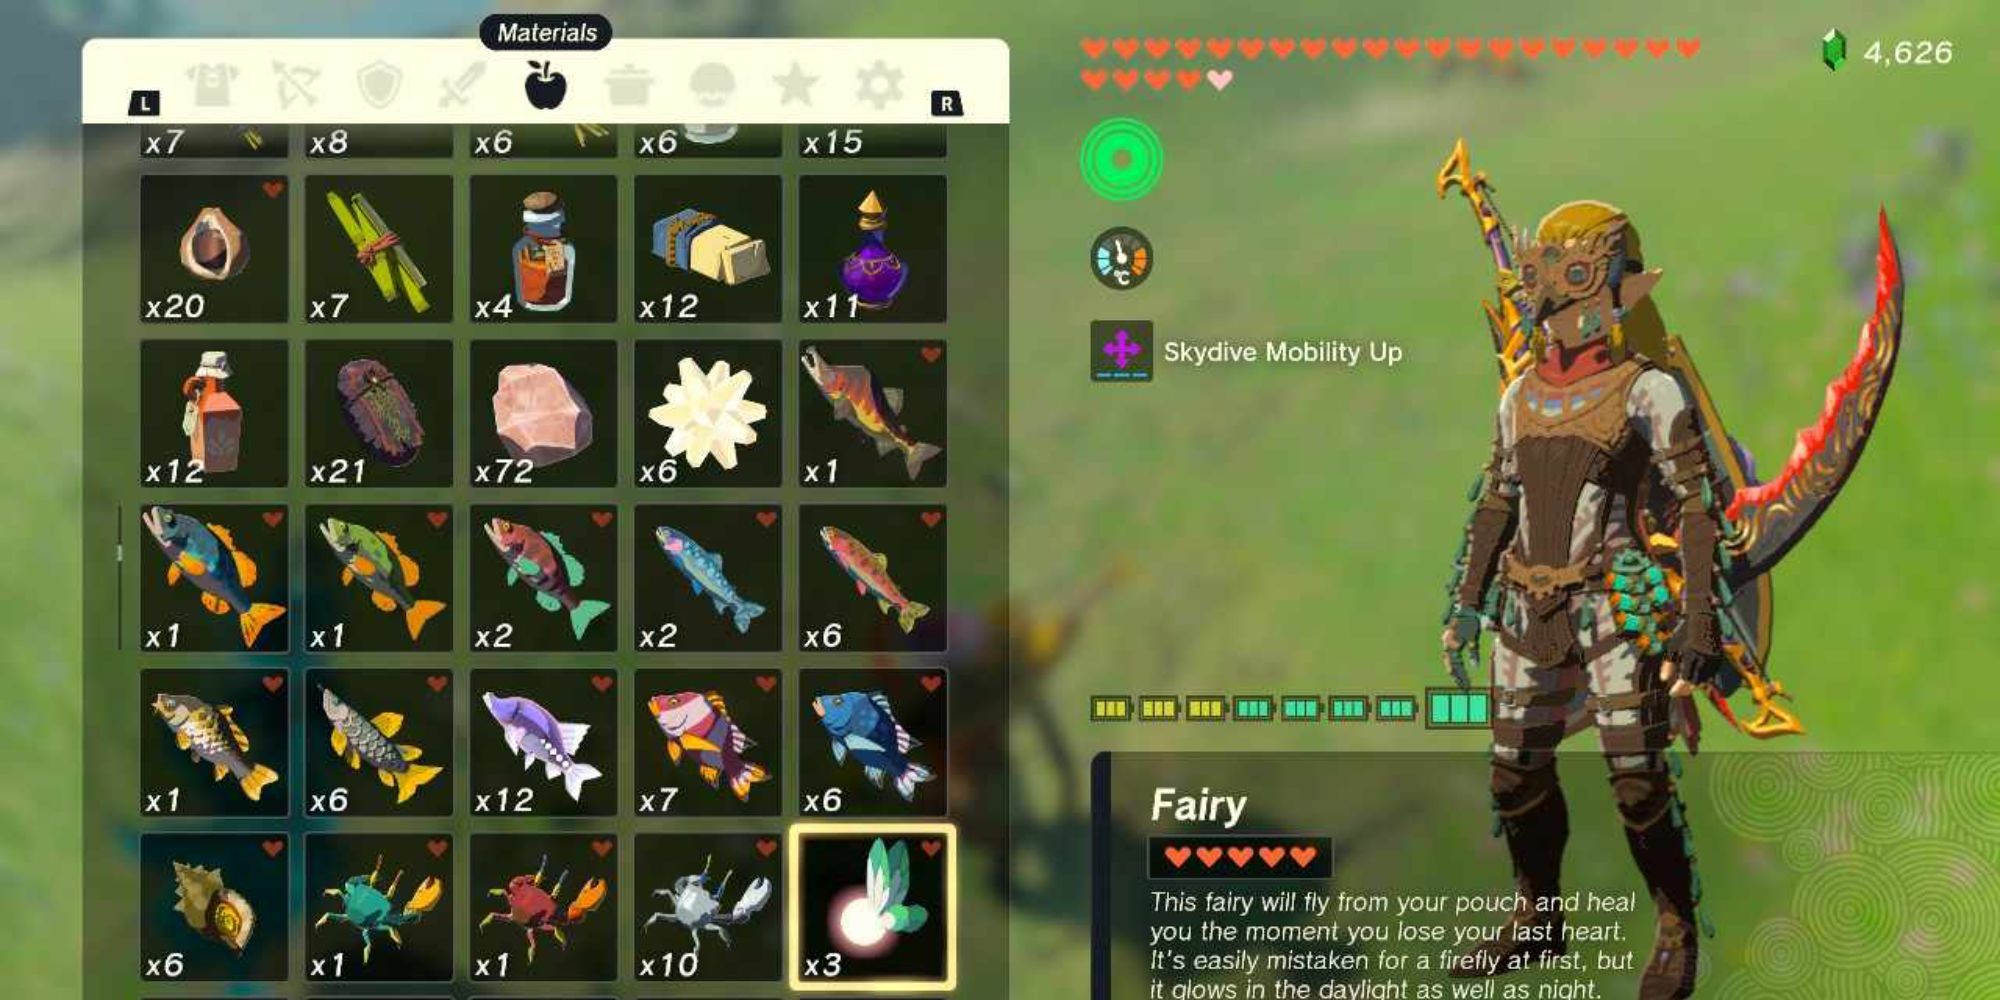 Link from Tears of the Kingdom stood beside his inventory, which is showing a Fairy